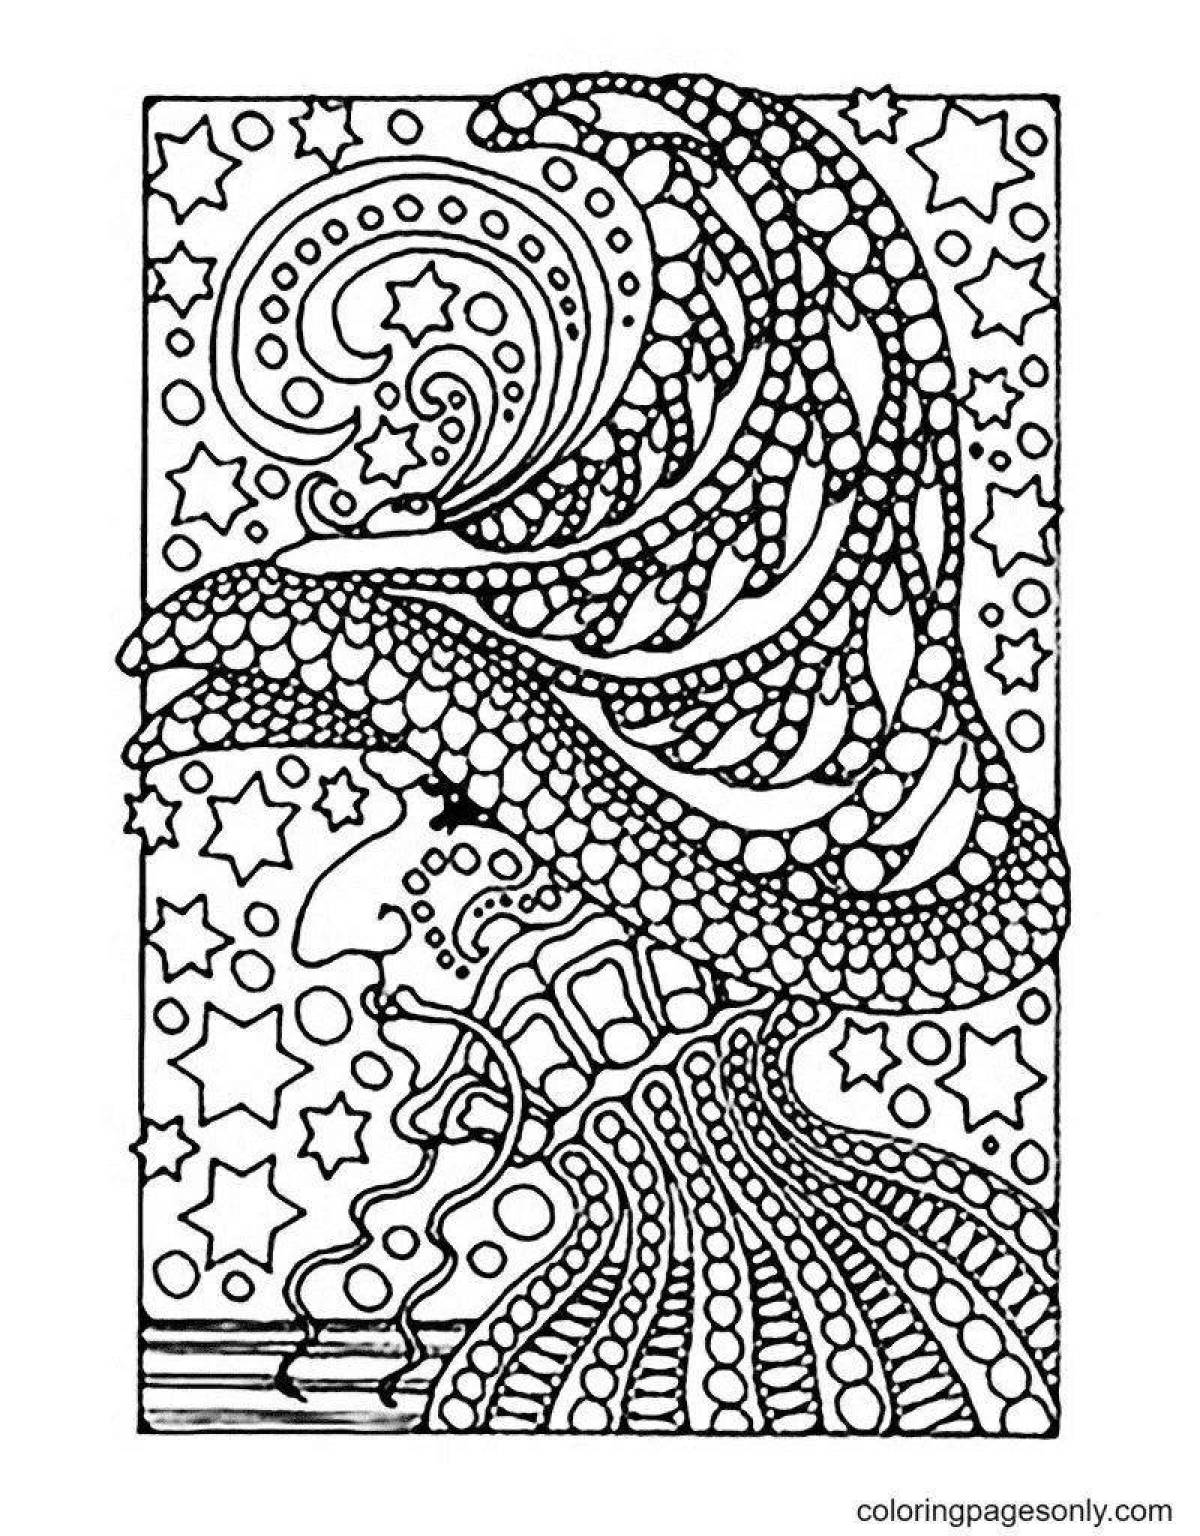 Sparkly adult coloring book